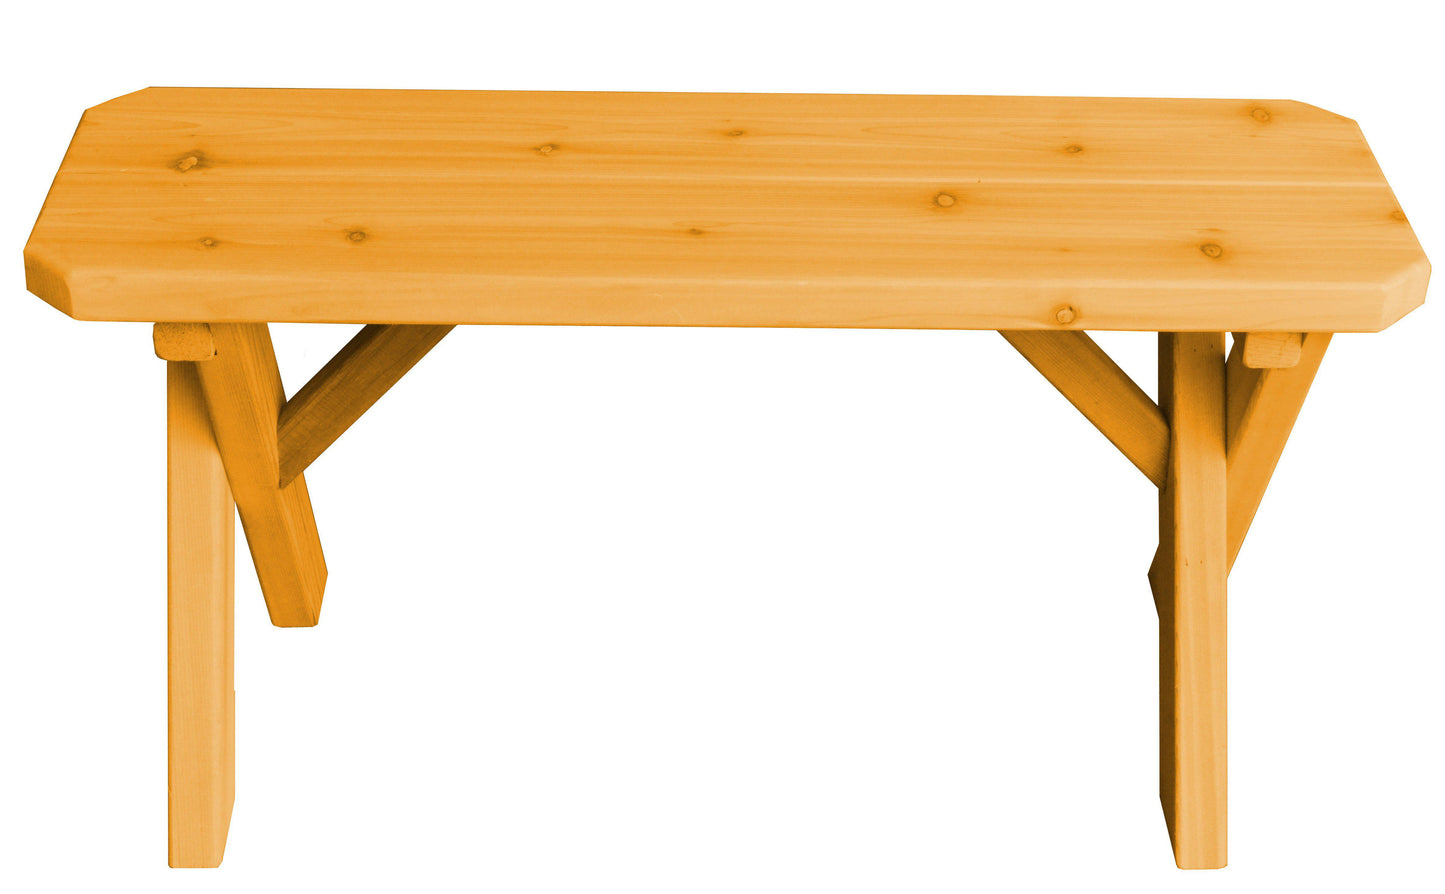 A&L FURNITURE CO. Western Red Cedar 44" Crossleg Bench Only - LEAD TIME TO SHIP 4 WEEKS OR LESS